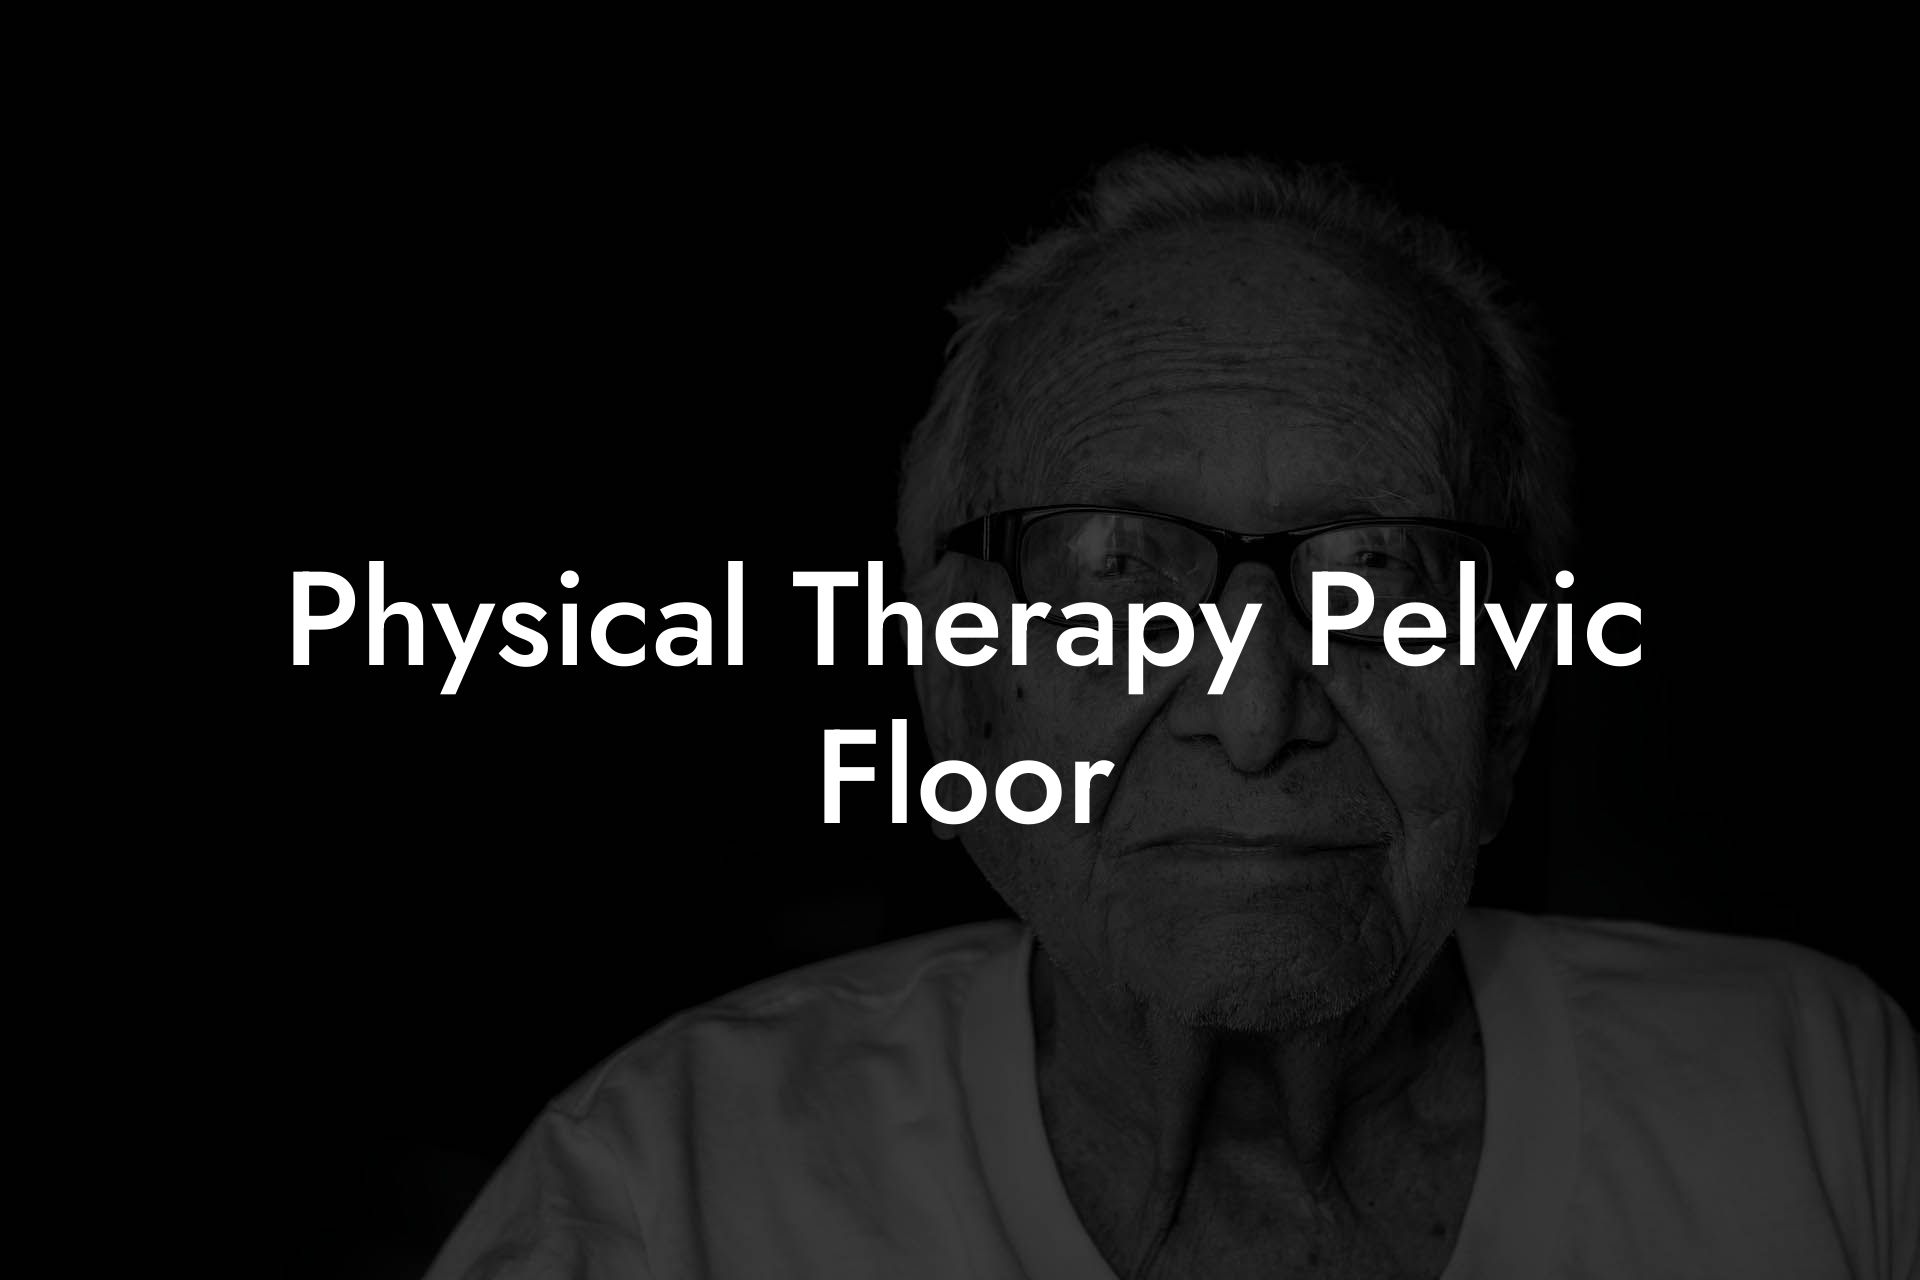 Physical Therapy Pelvic Floor